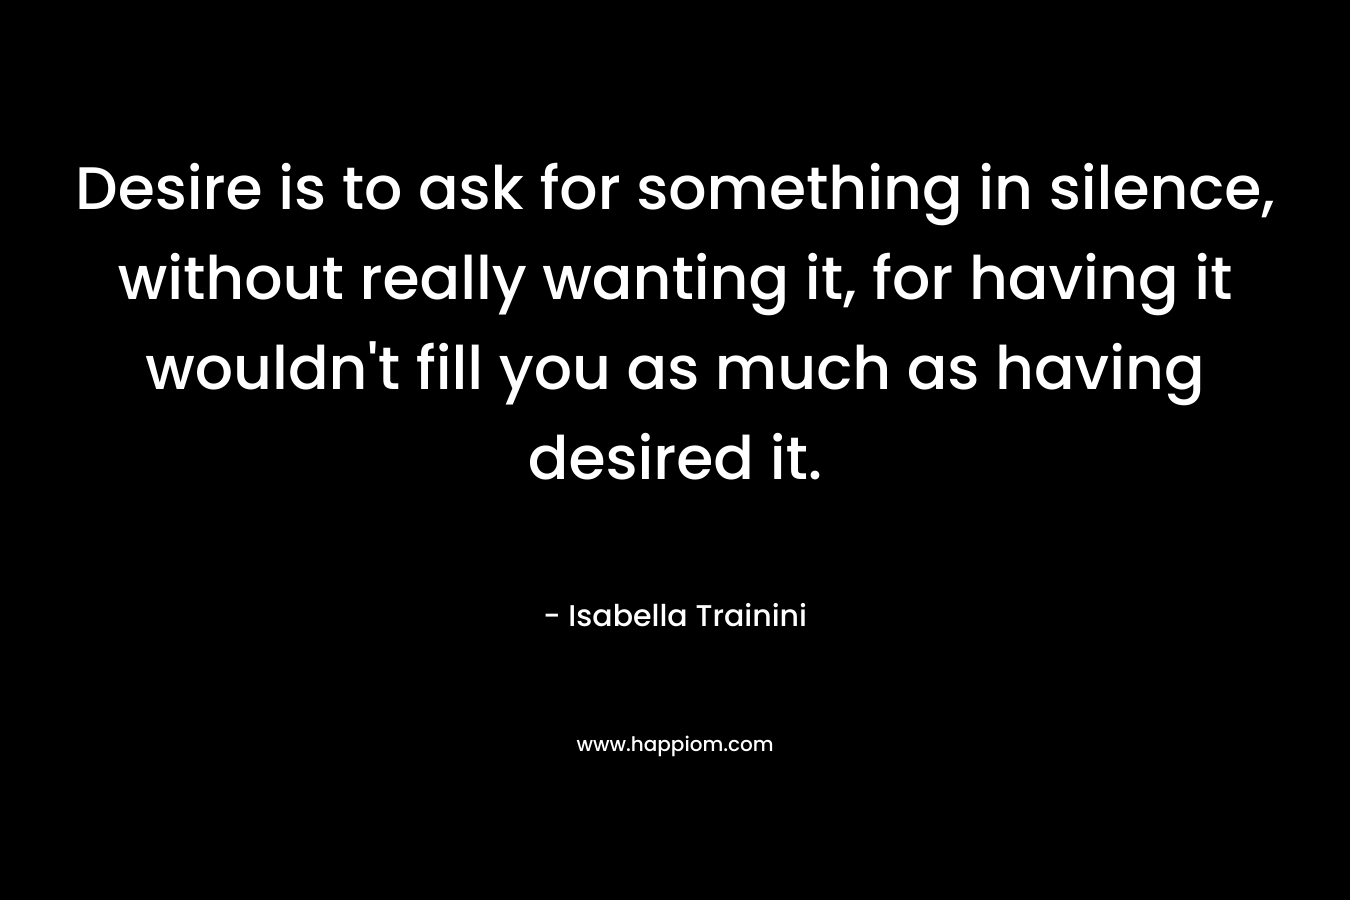 Desire is to ask for something in silence, without really wanting it, for having it wouldn't fill you as much as having desired it.